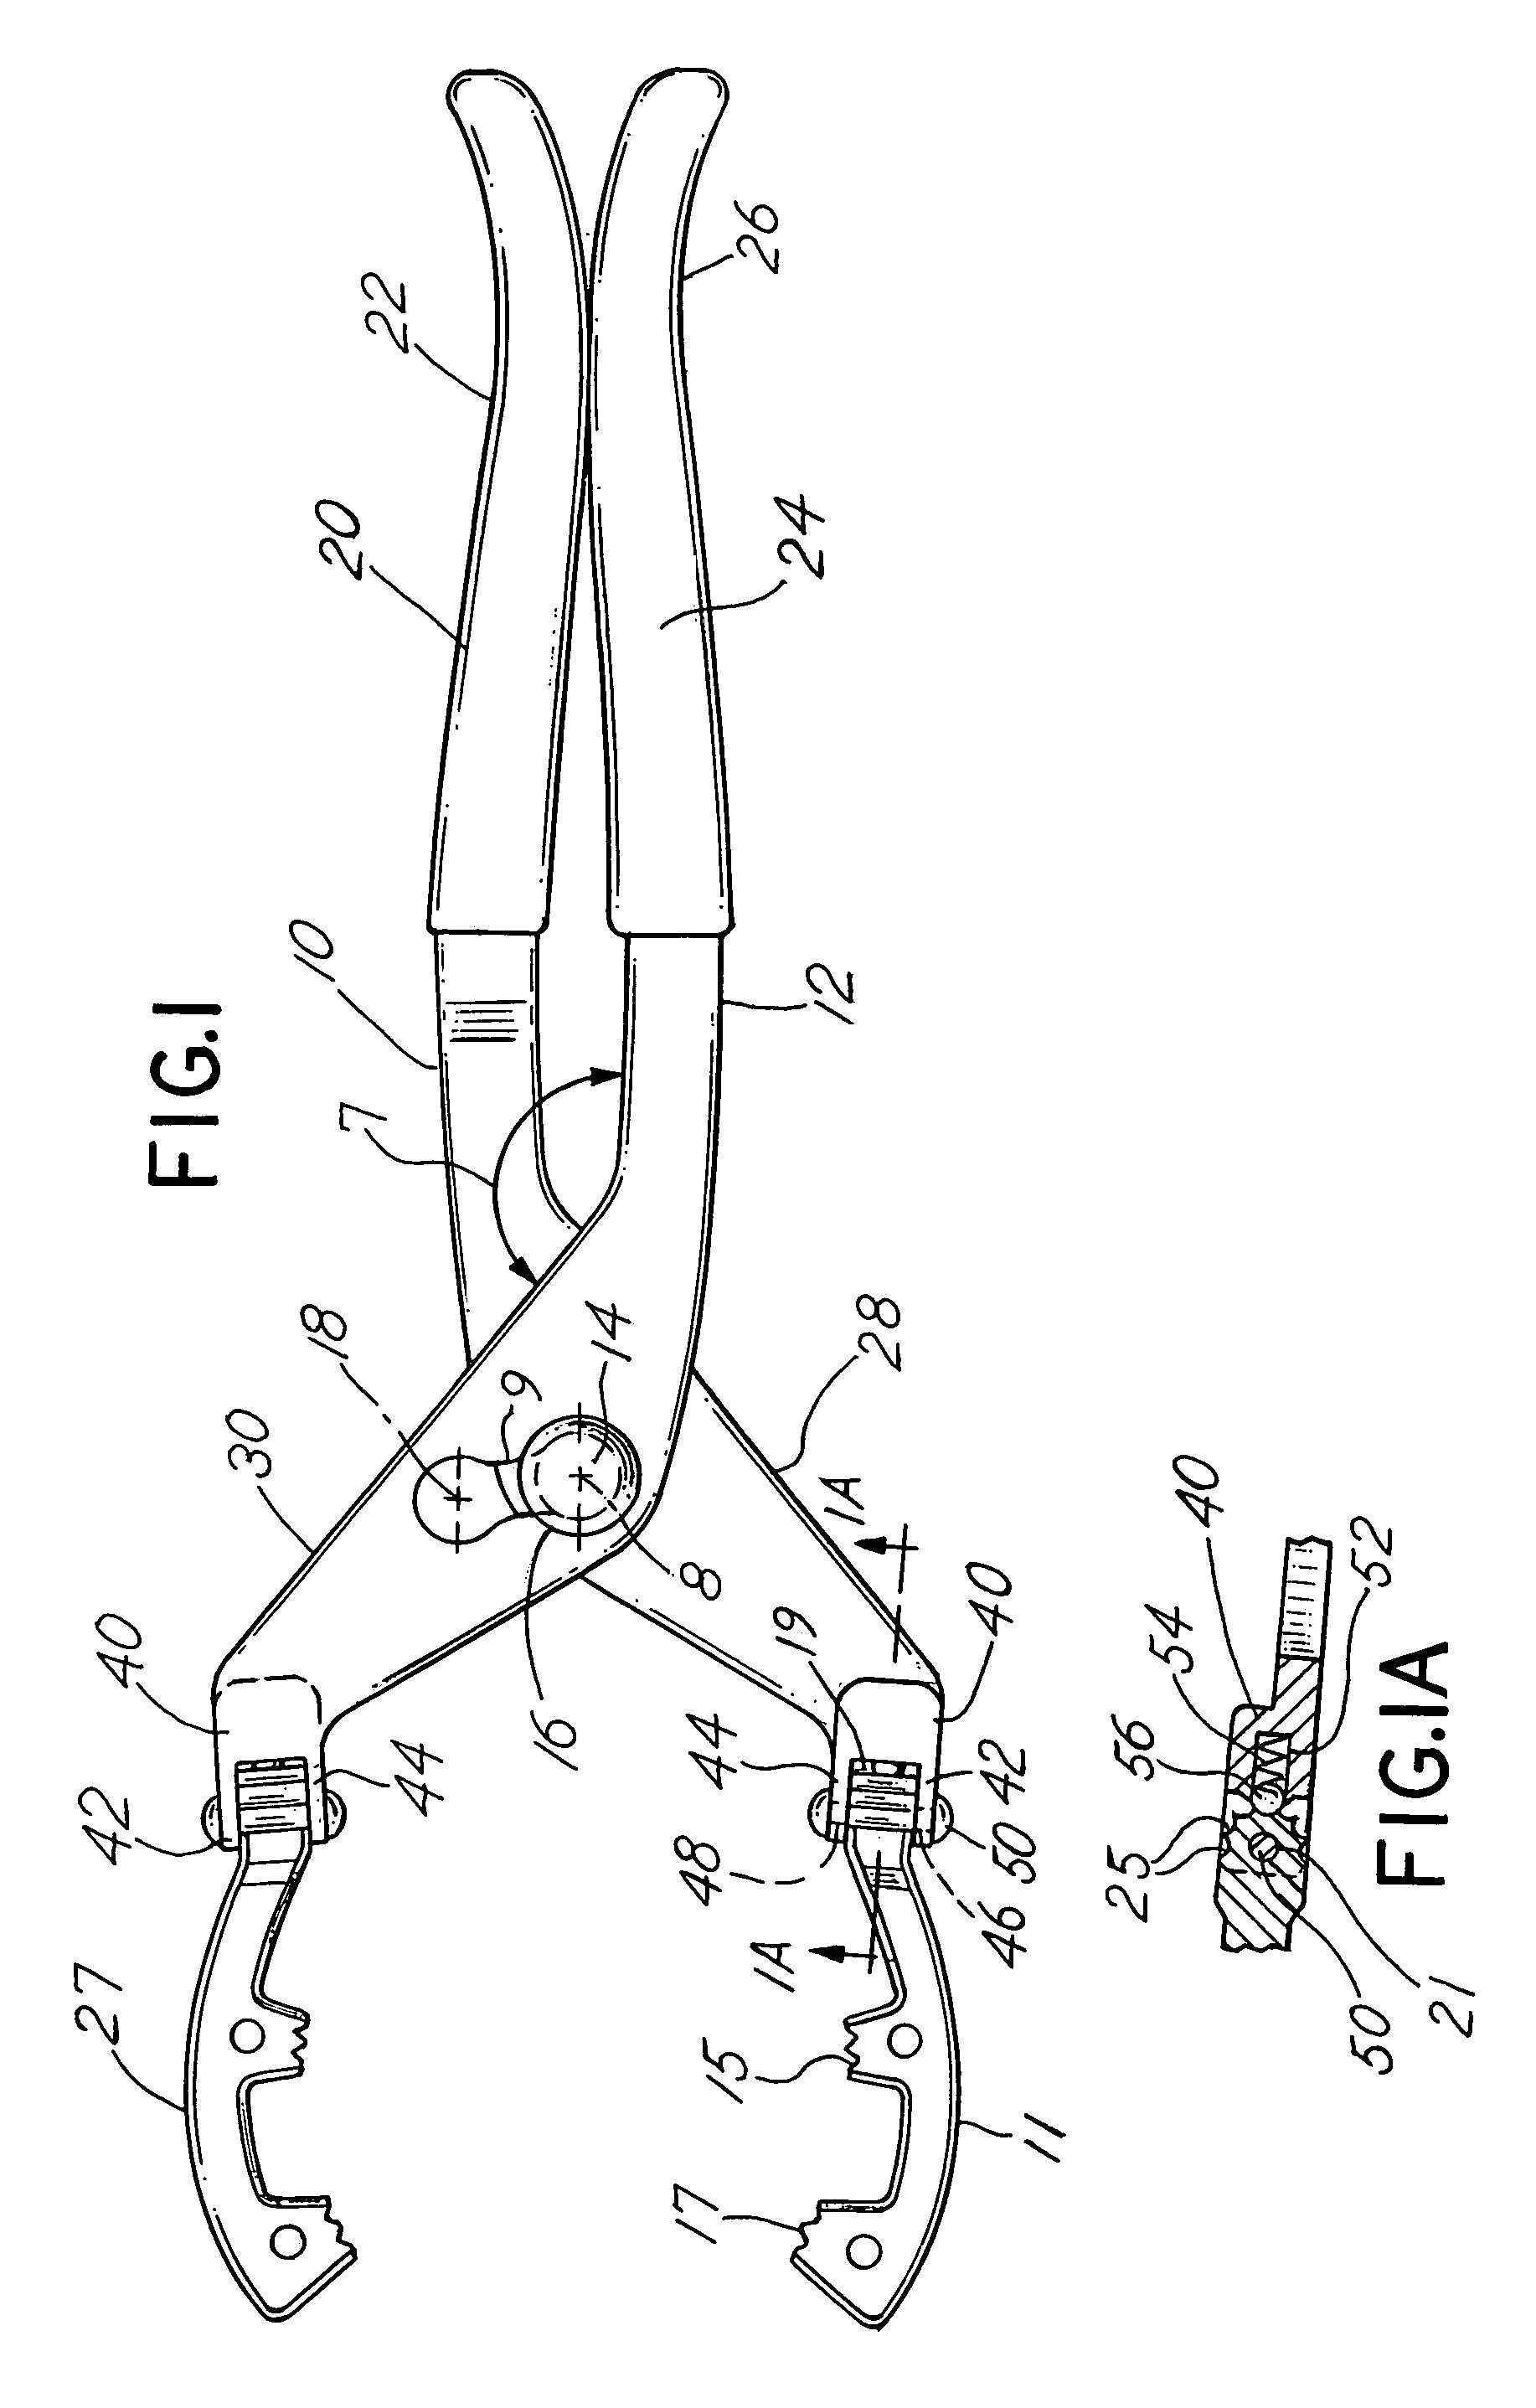 Adjustable wrench for removal of vehicle oil filters